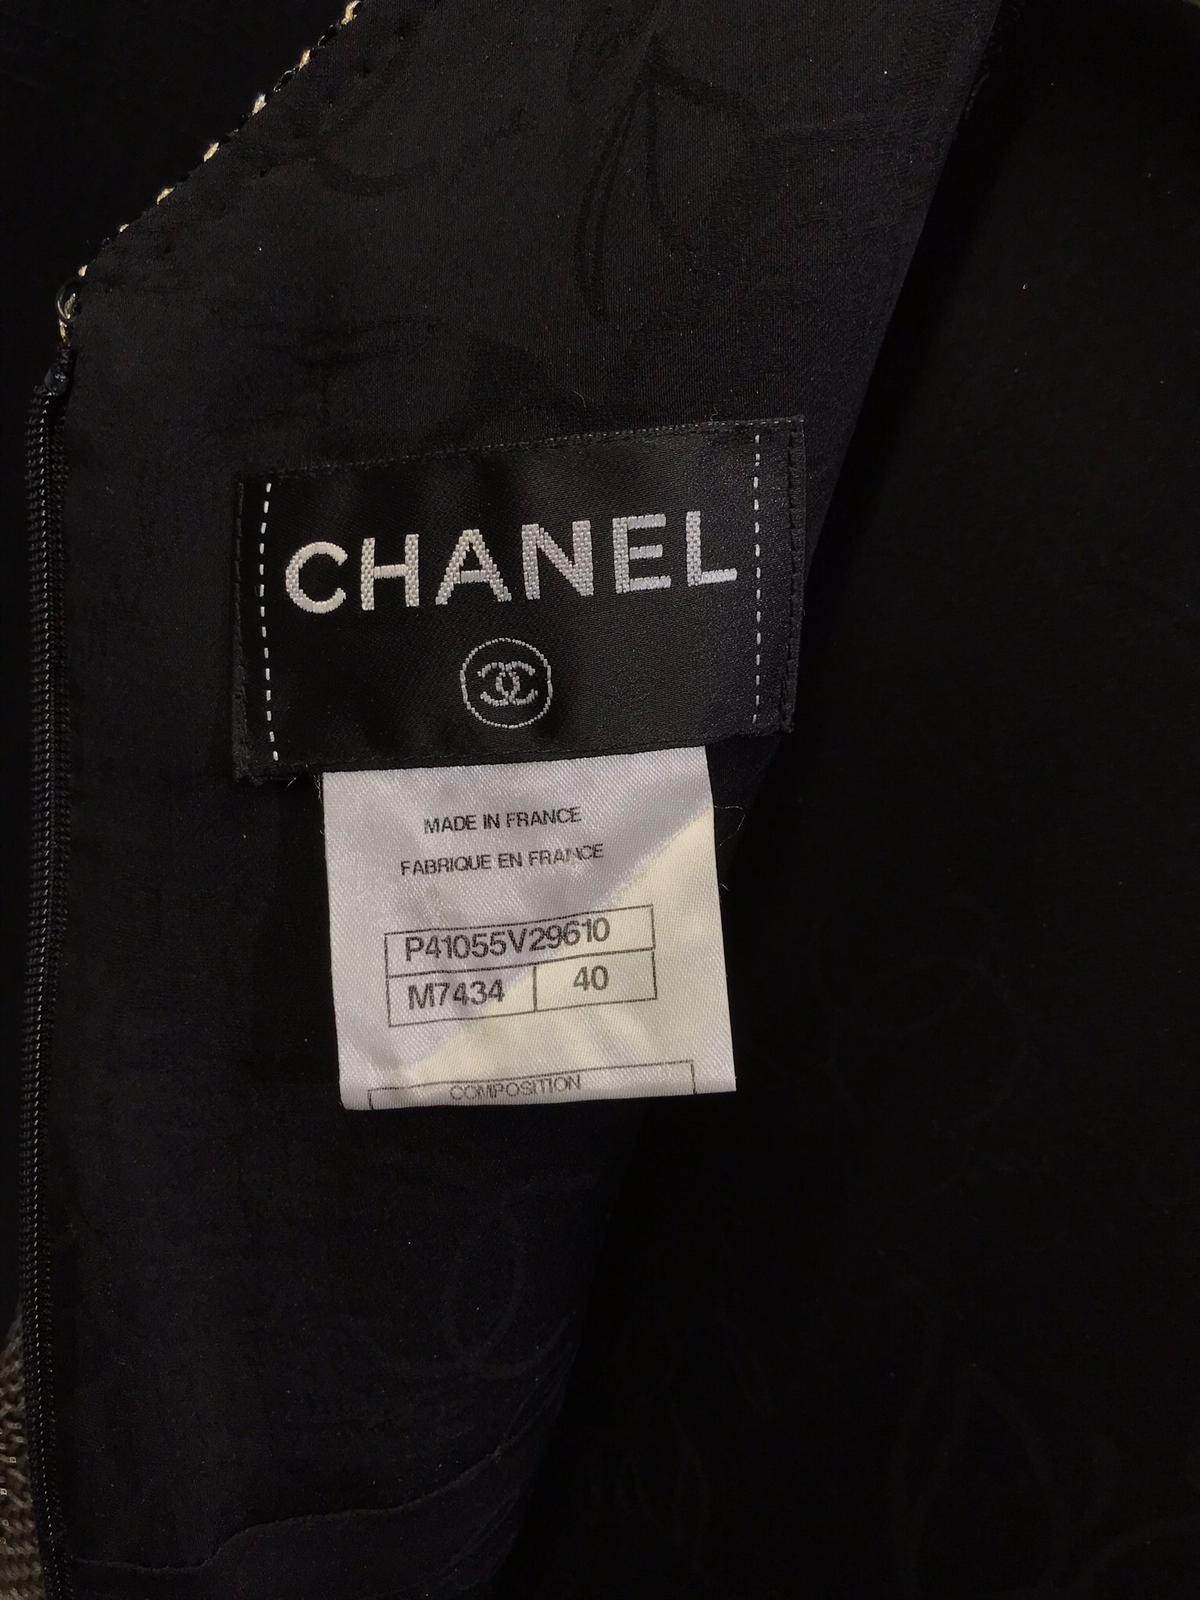 Women's Chanel Black and White Dress with Strap Details For Sale